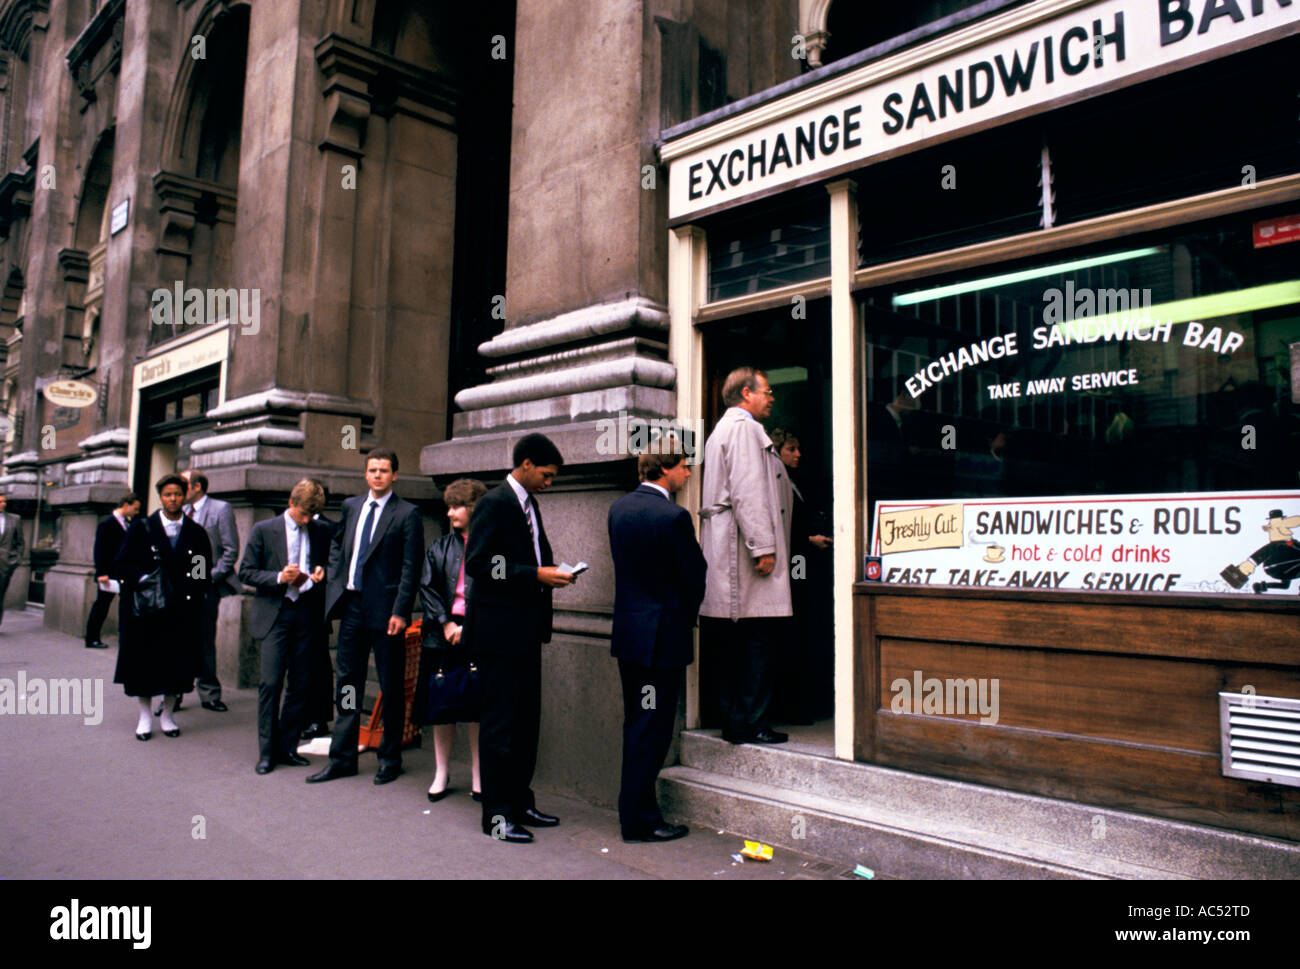 QUEUEING FOR SANDWICHES  Stock Photo